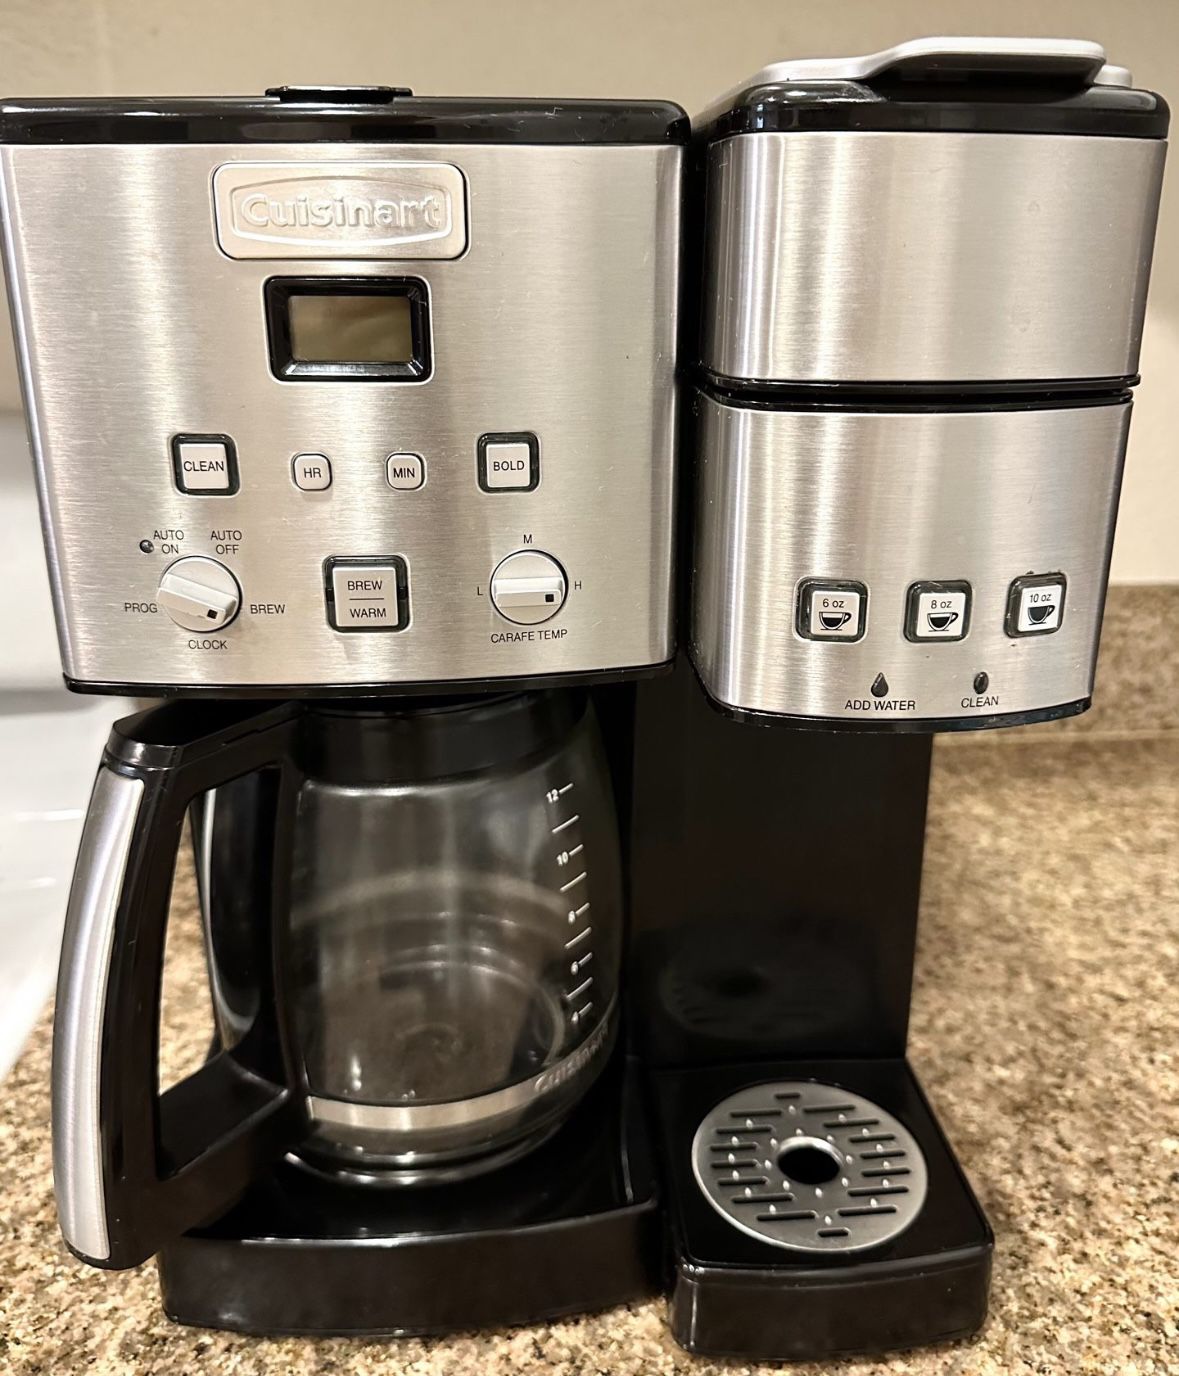 PINK Cuisinart 12-cup Coffee Maker/Brewer for Sale in Newark, OH - OfferUp